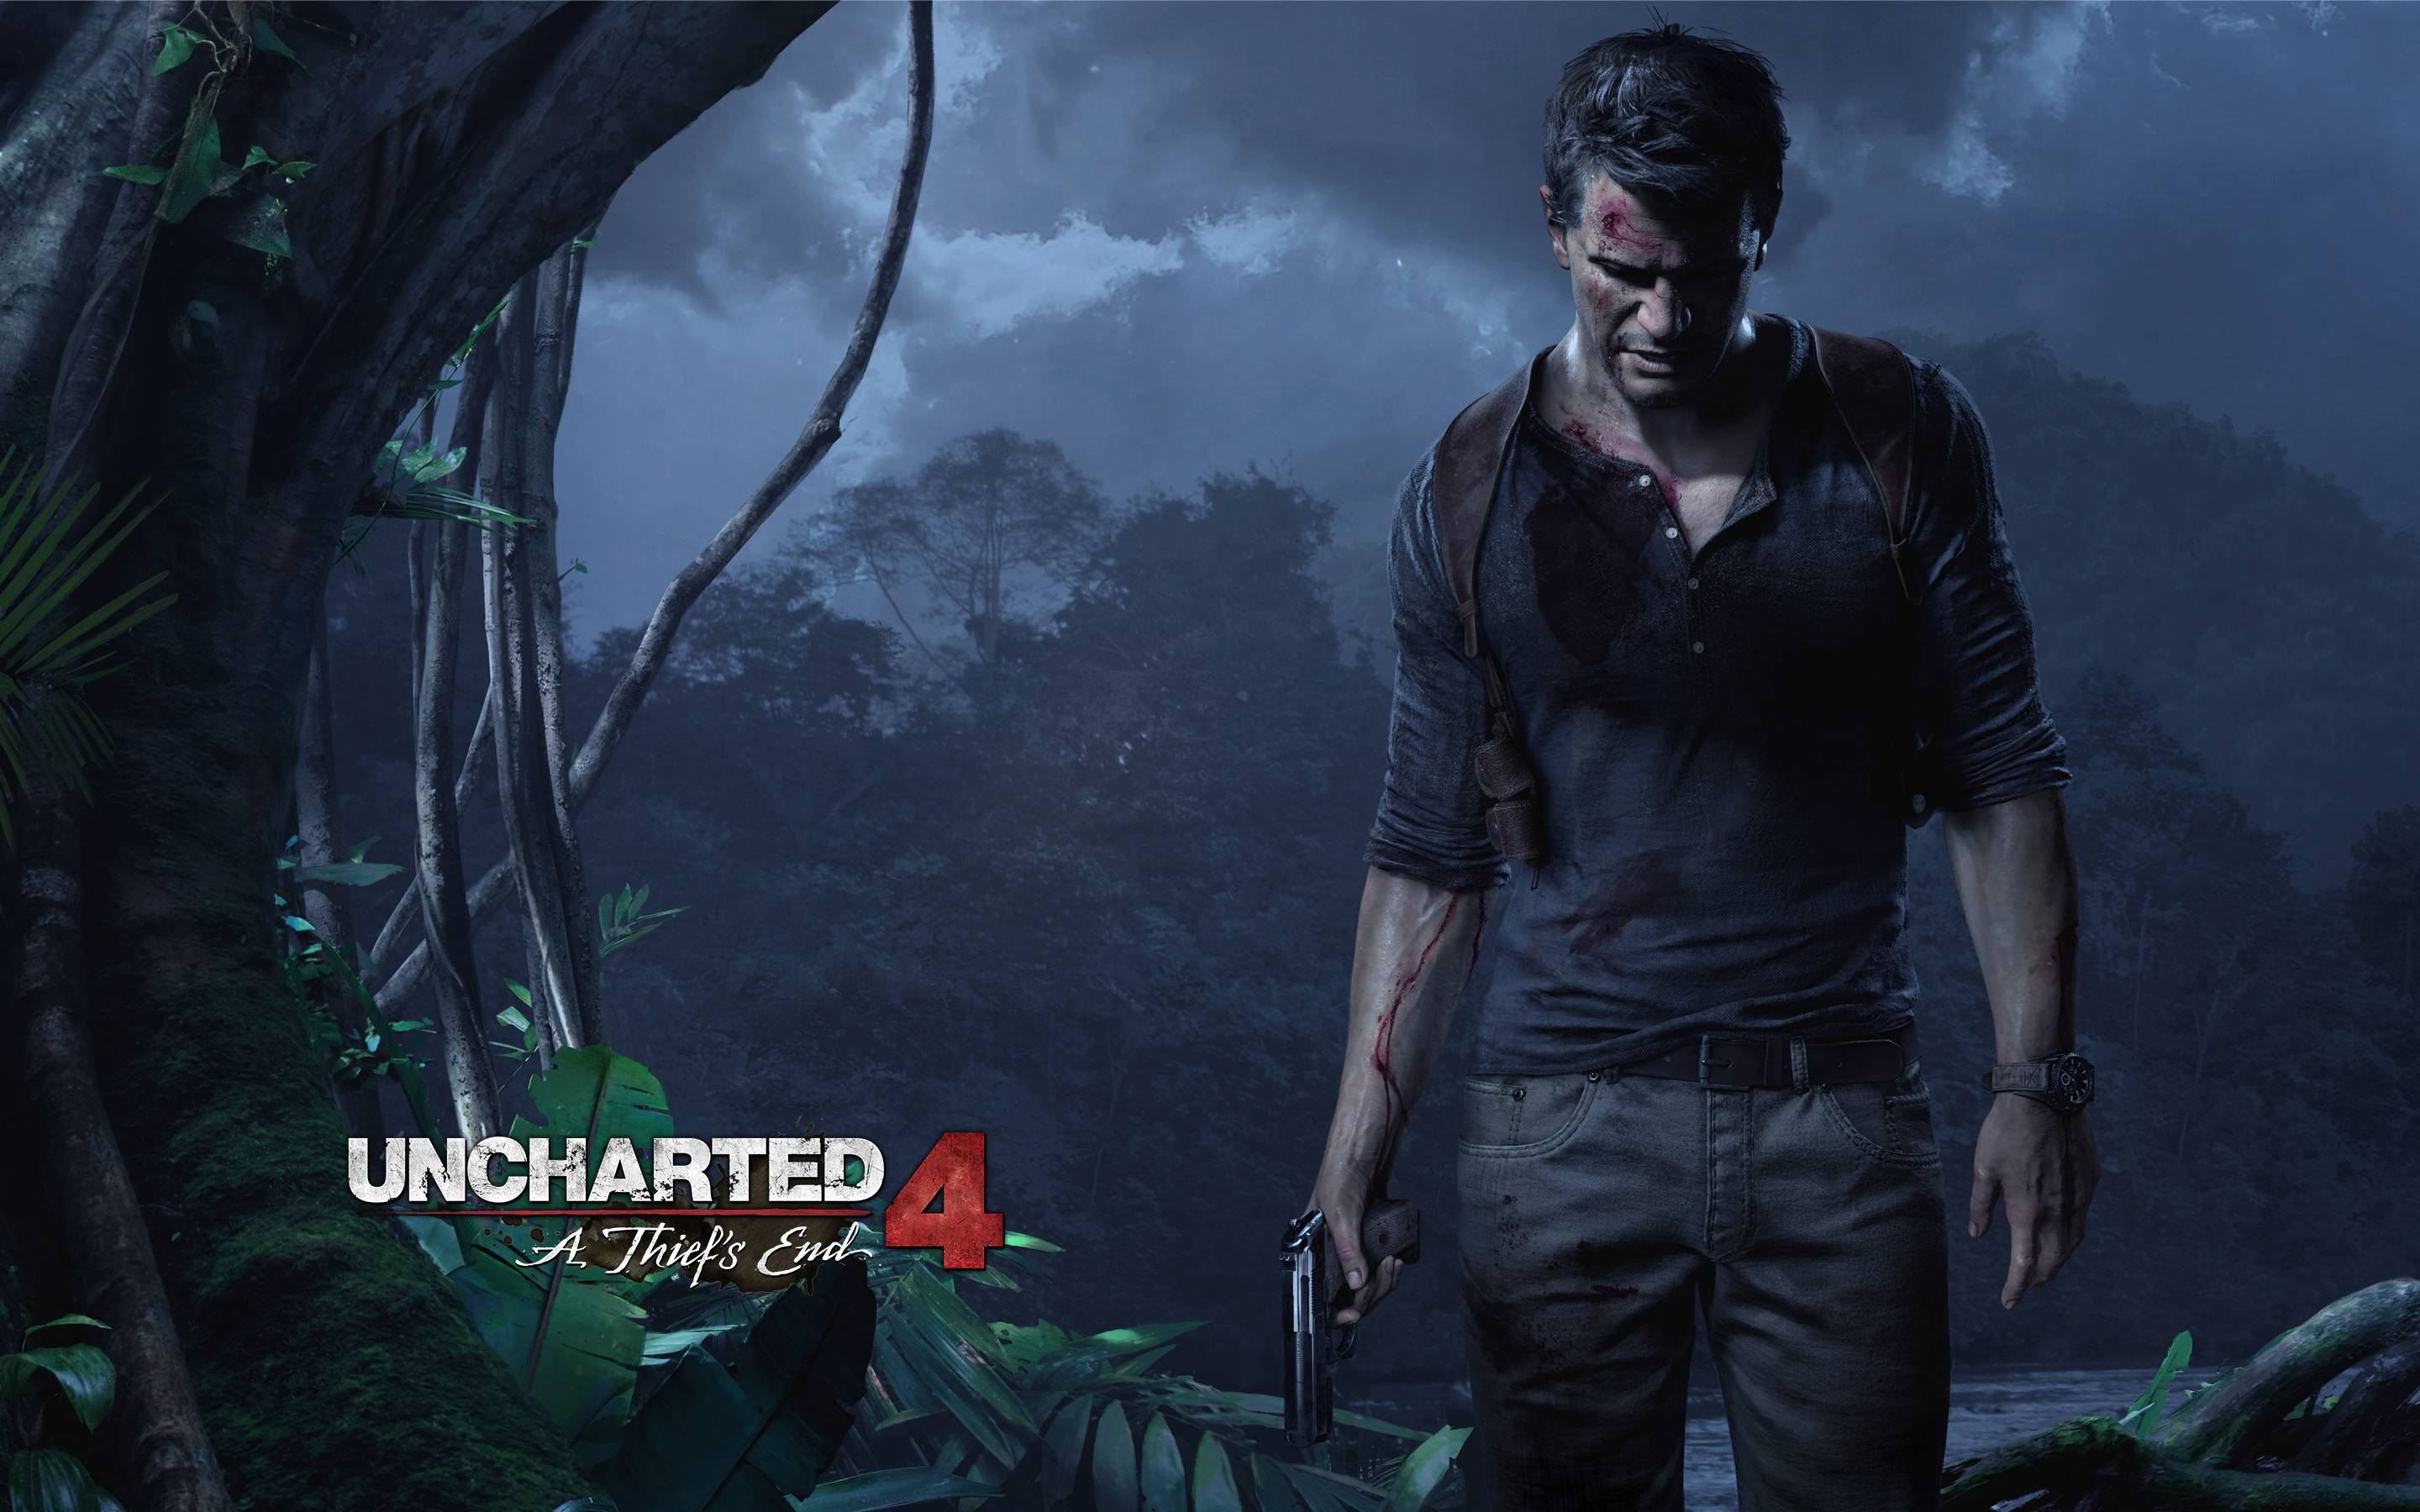 Uncharted 4 A Thief&;s End Game Wallpaper